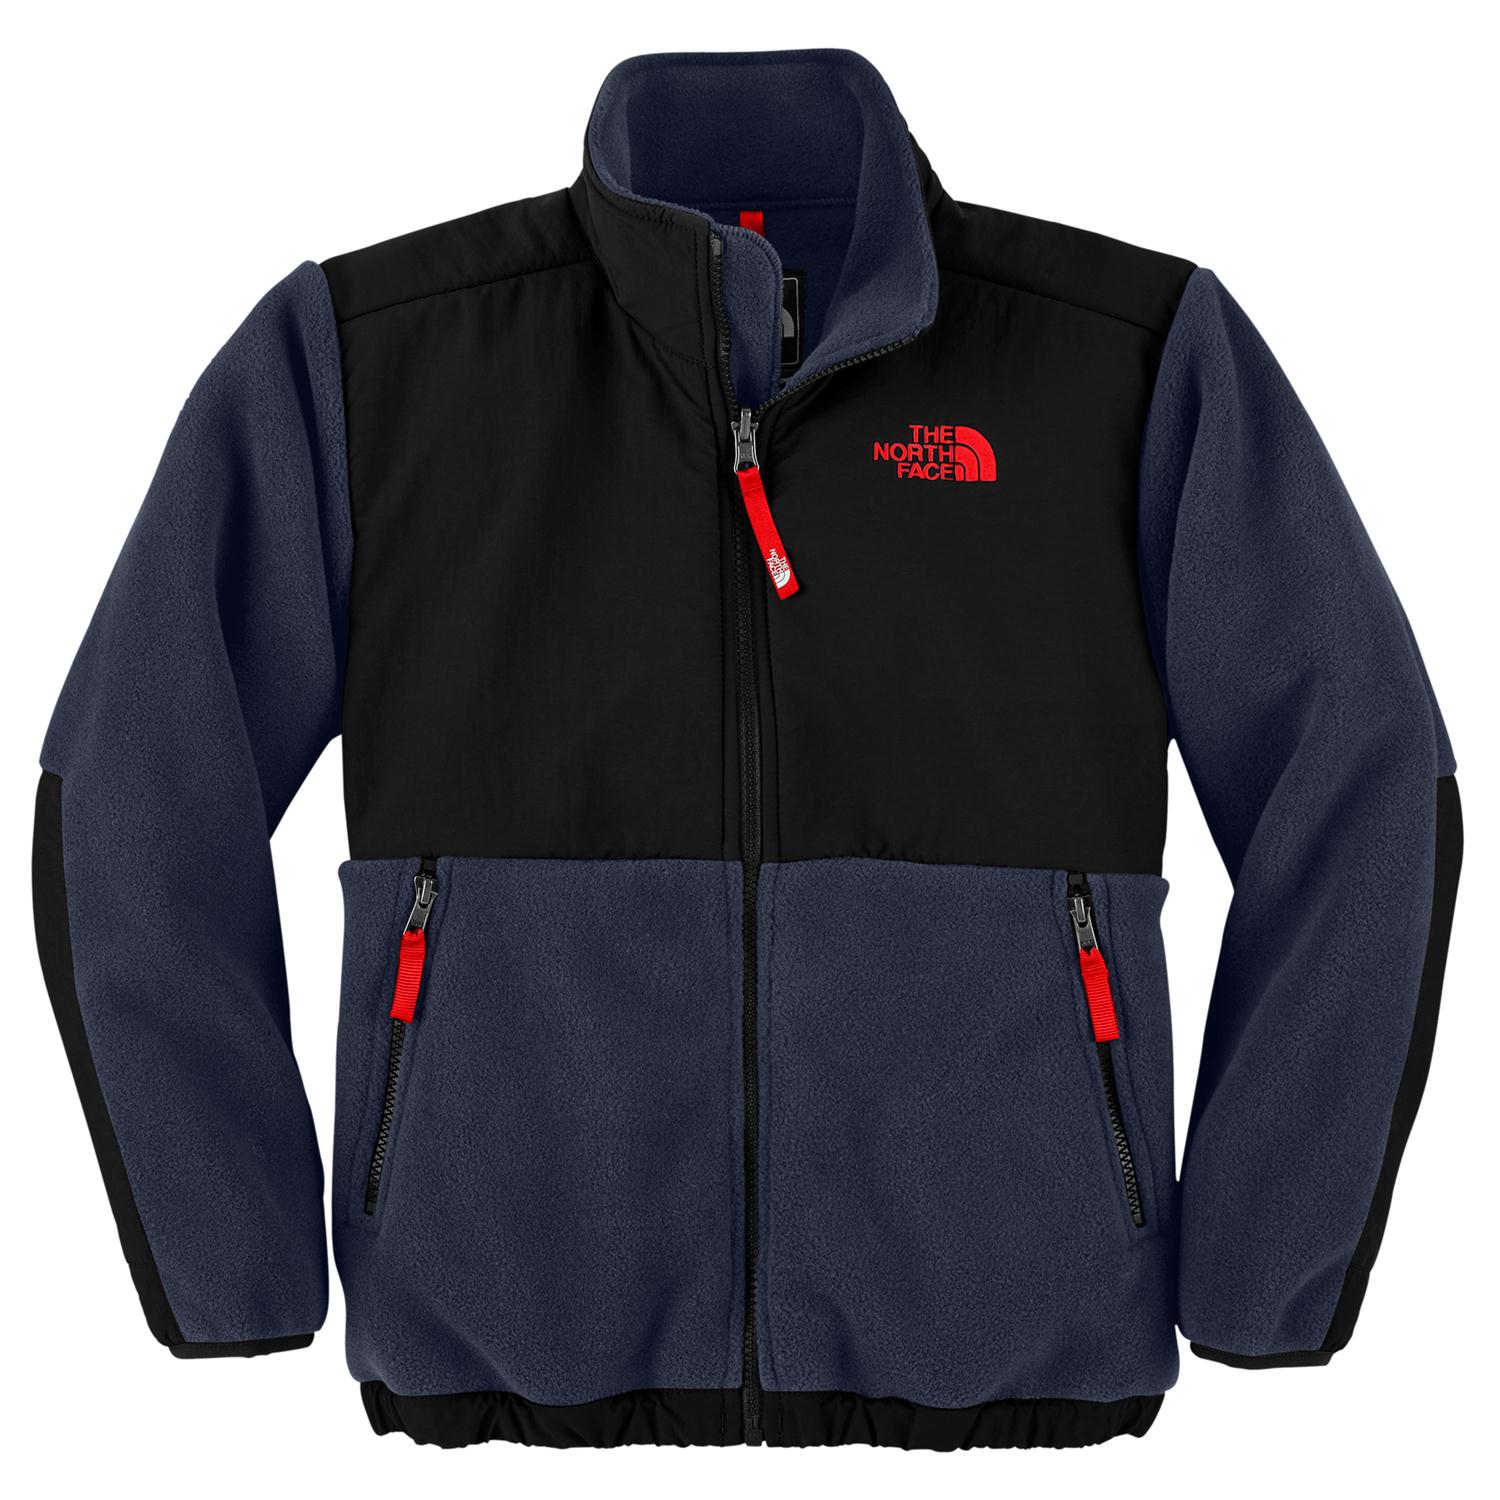 The North Face Denali Jacket - Youth - Boy's | evo outlet